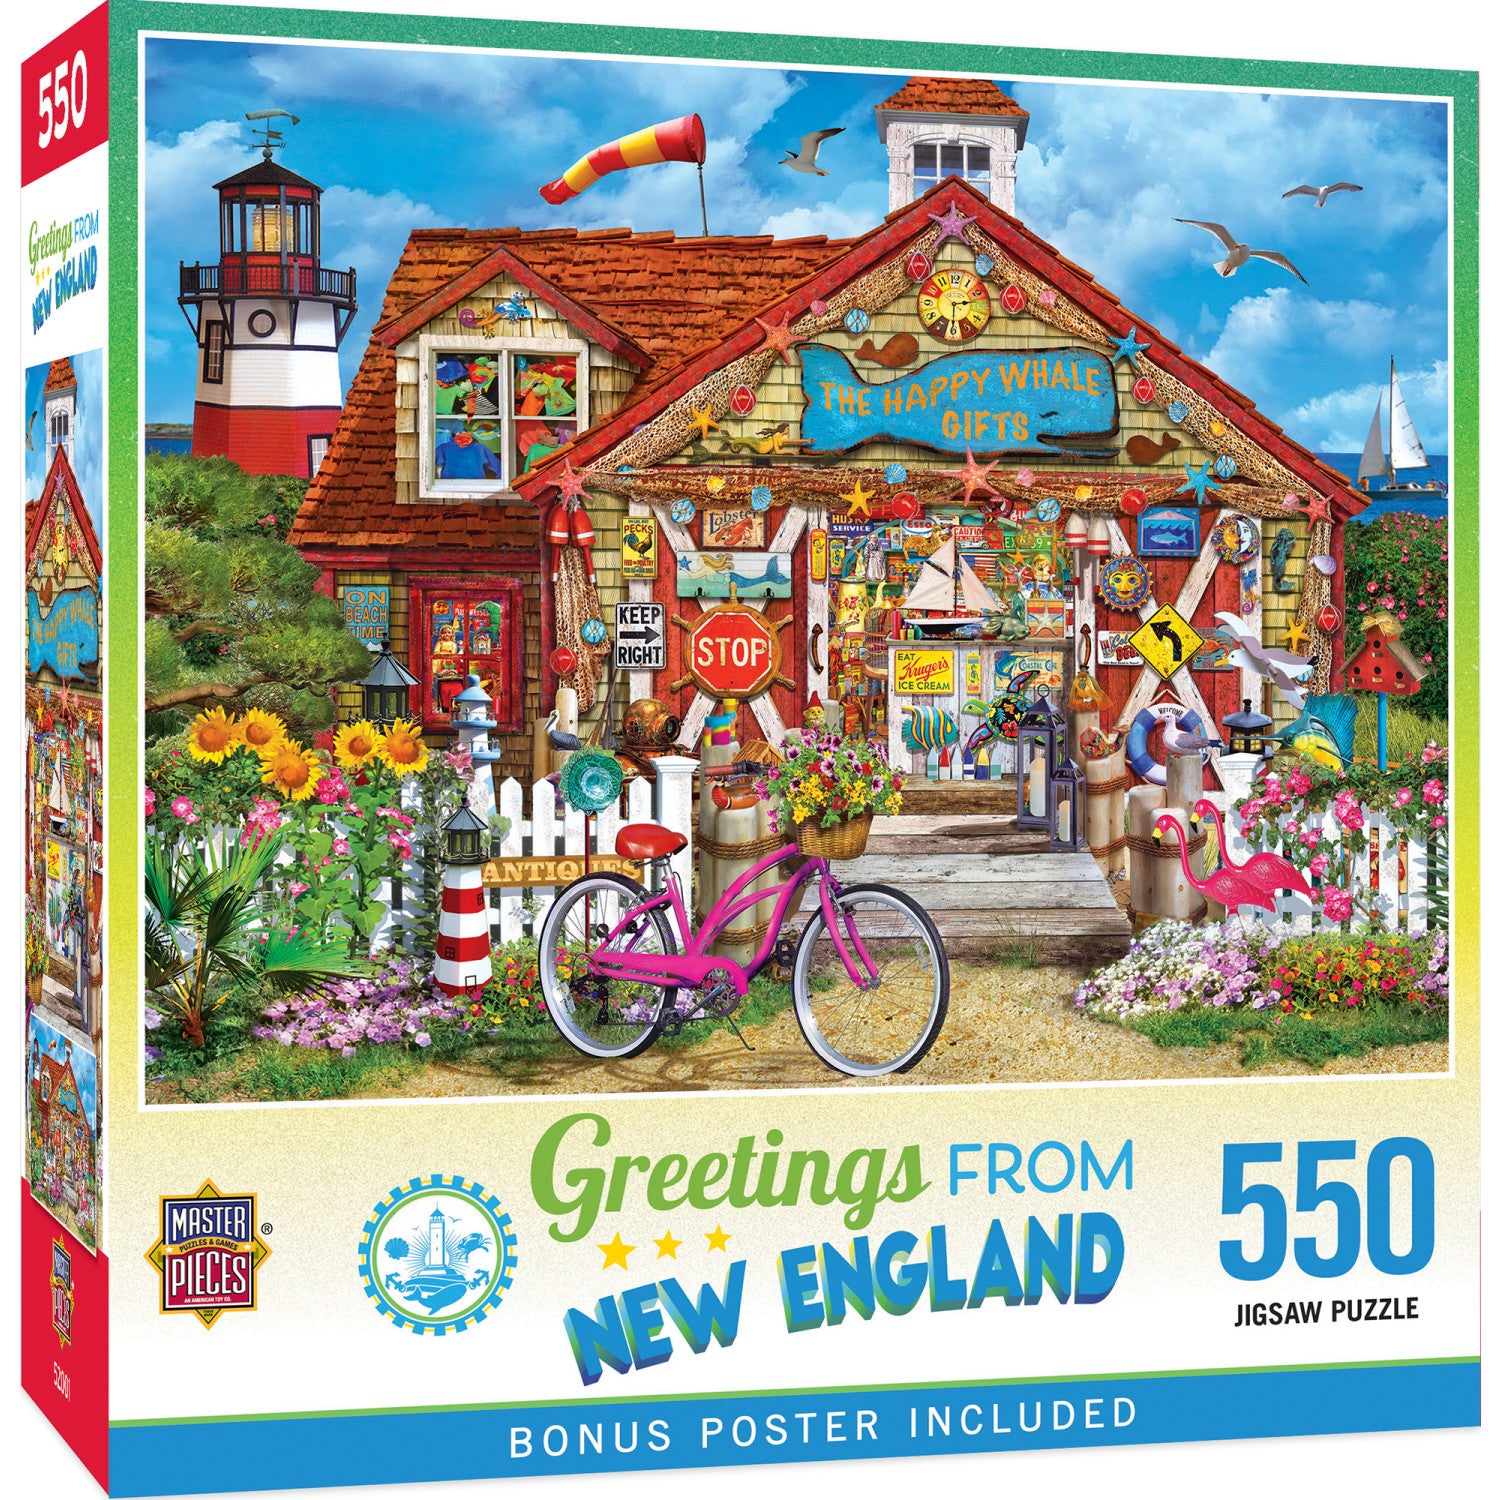 Greetings From New England - 550 Piece Puzzle